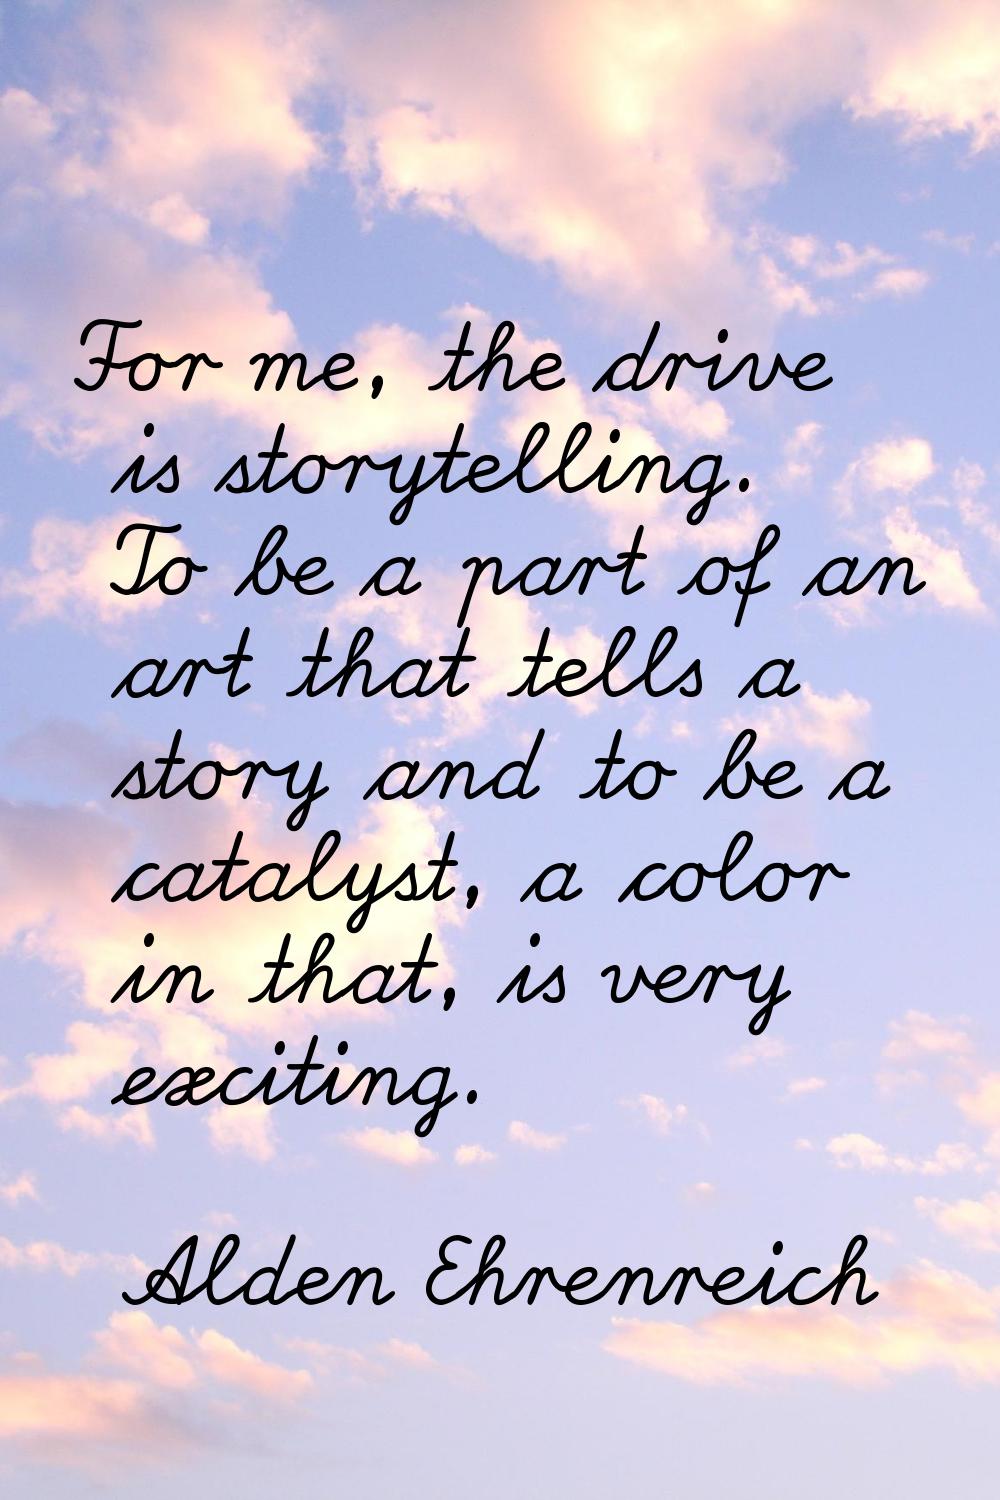 For me, the drive is storytelling. To be a part of an art that tells a story and to be a catalyst, 